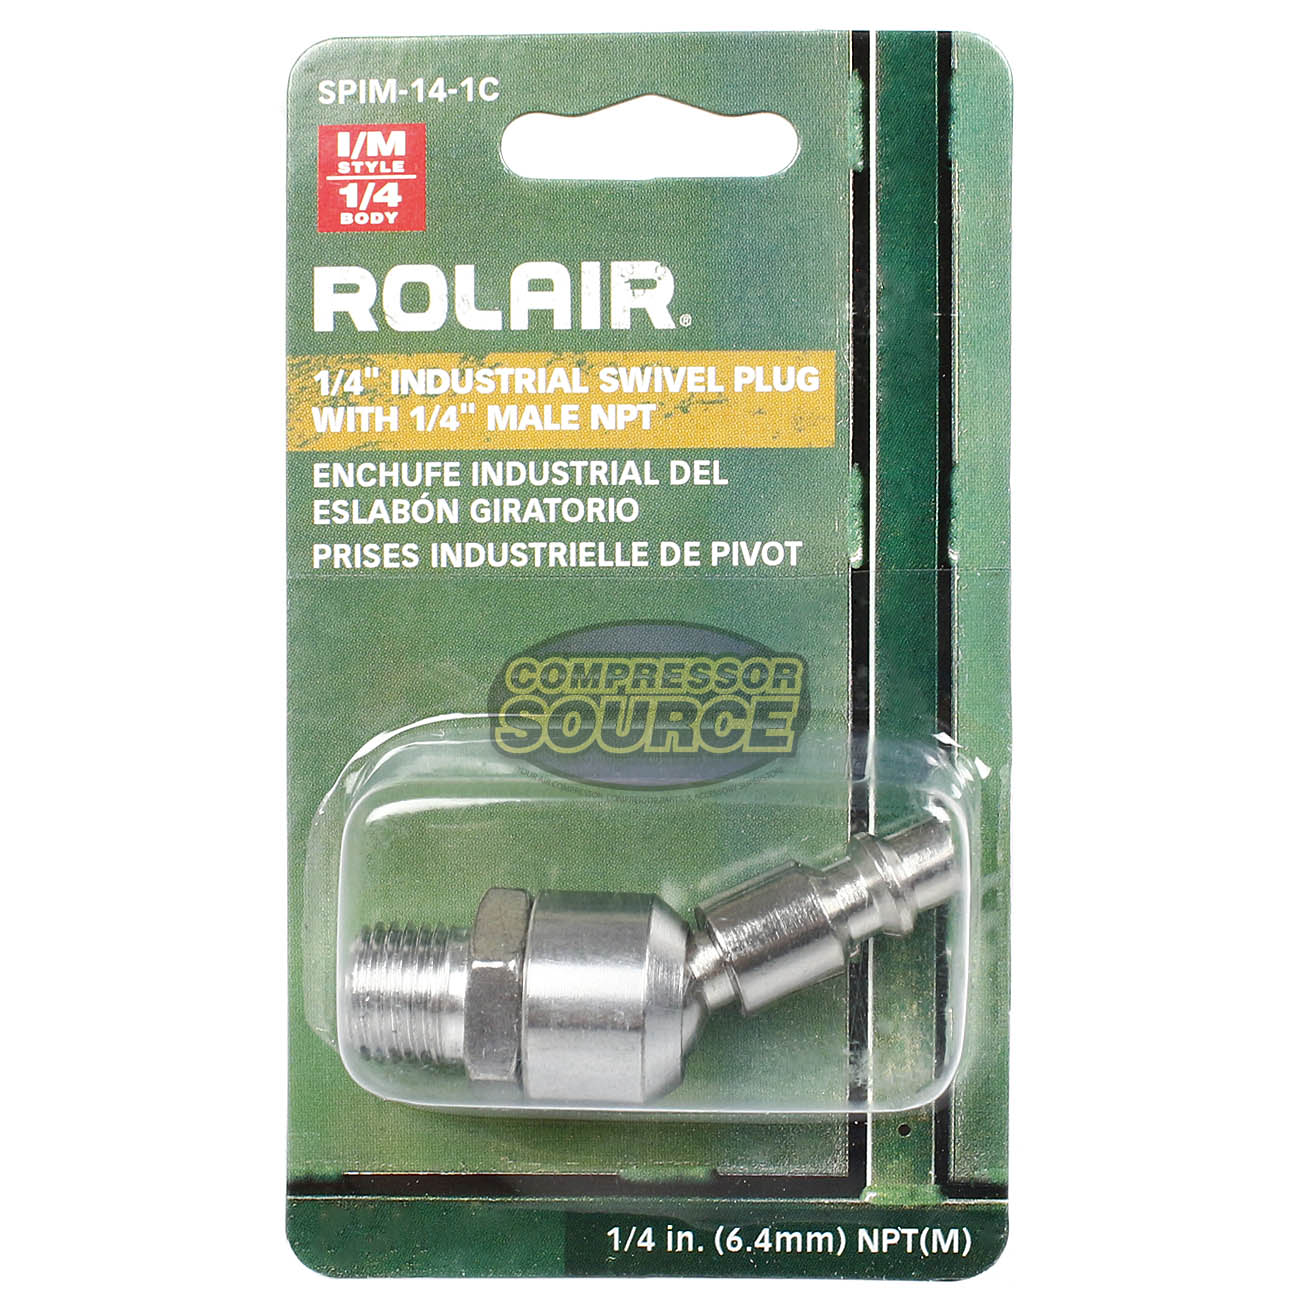 1/4" Industrial I/M Style Steel Swivel Plug with 1/4" Male NPT Single New Rolair